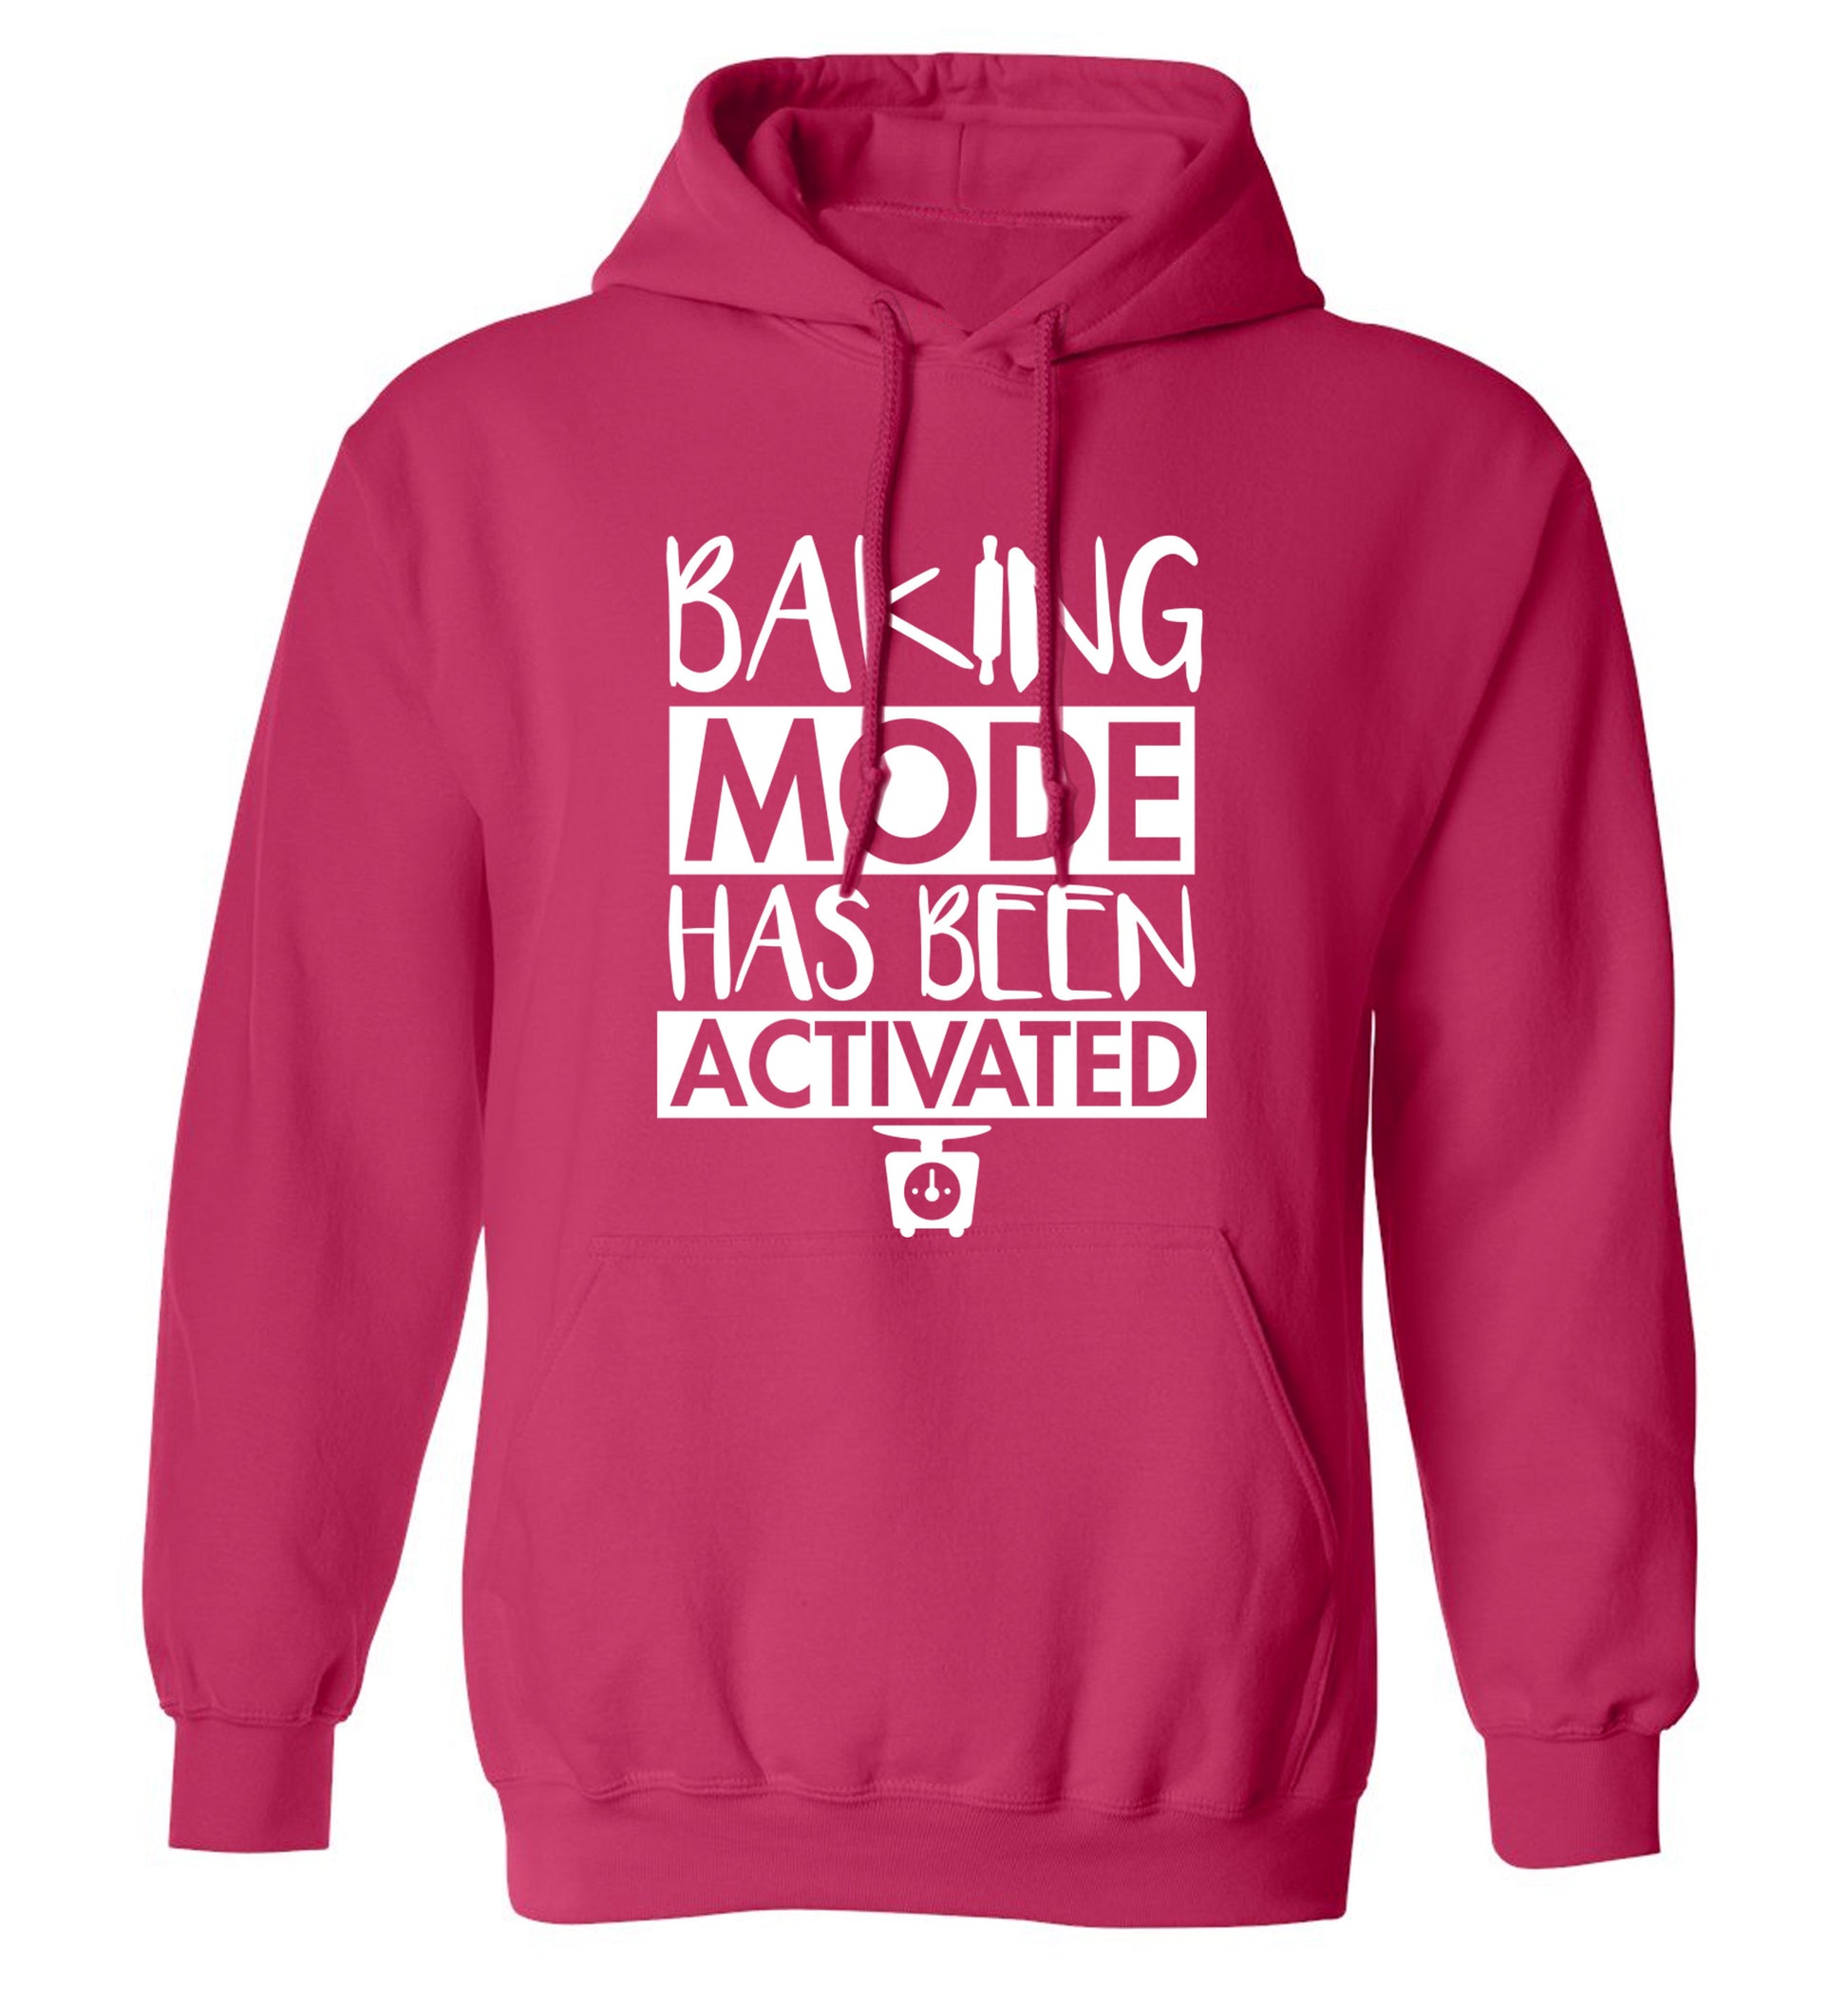 Baking mode has been activated adults unisex pink hoodie 2XL